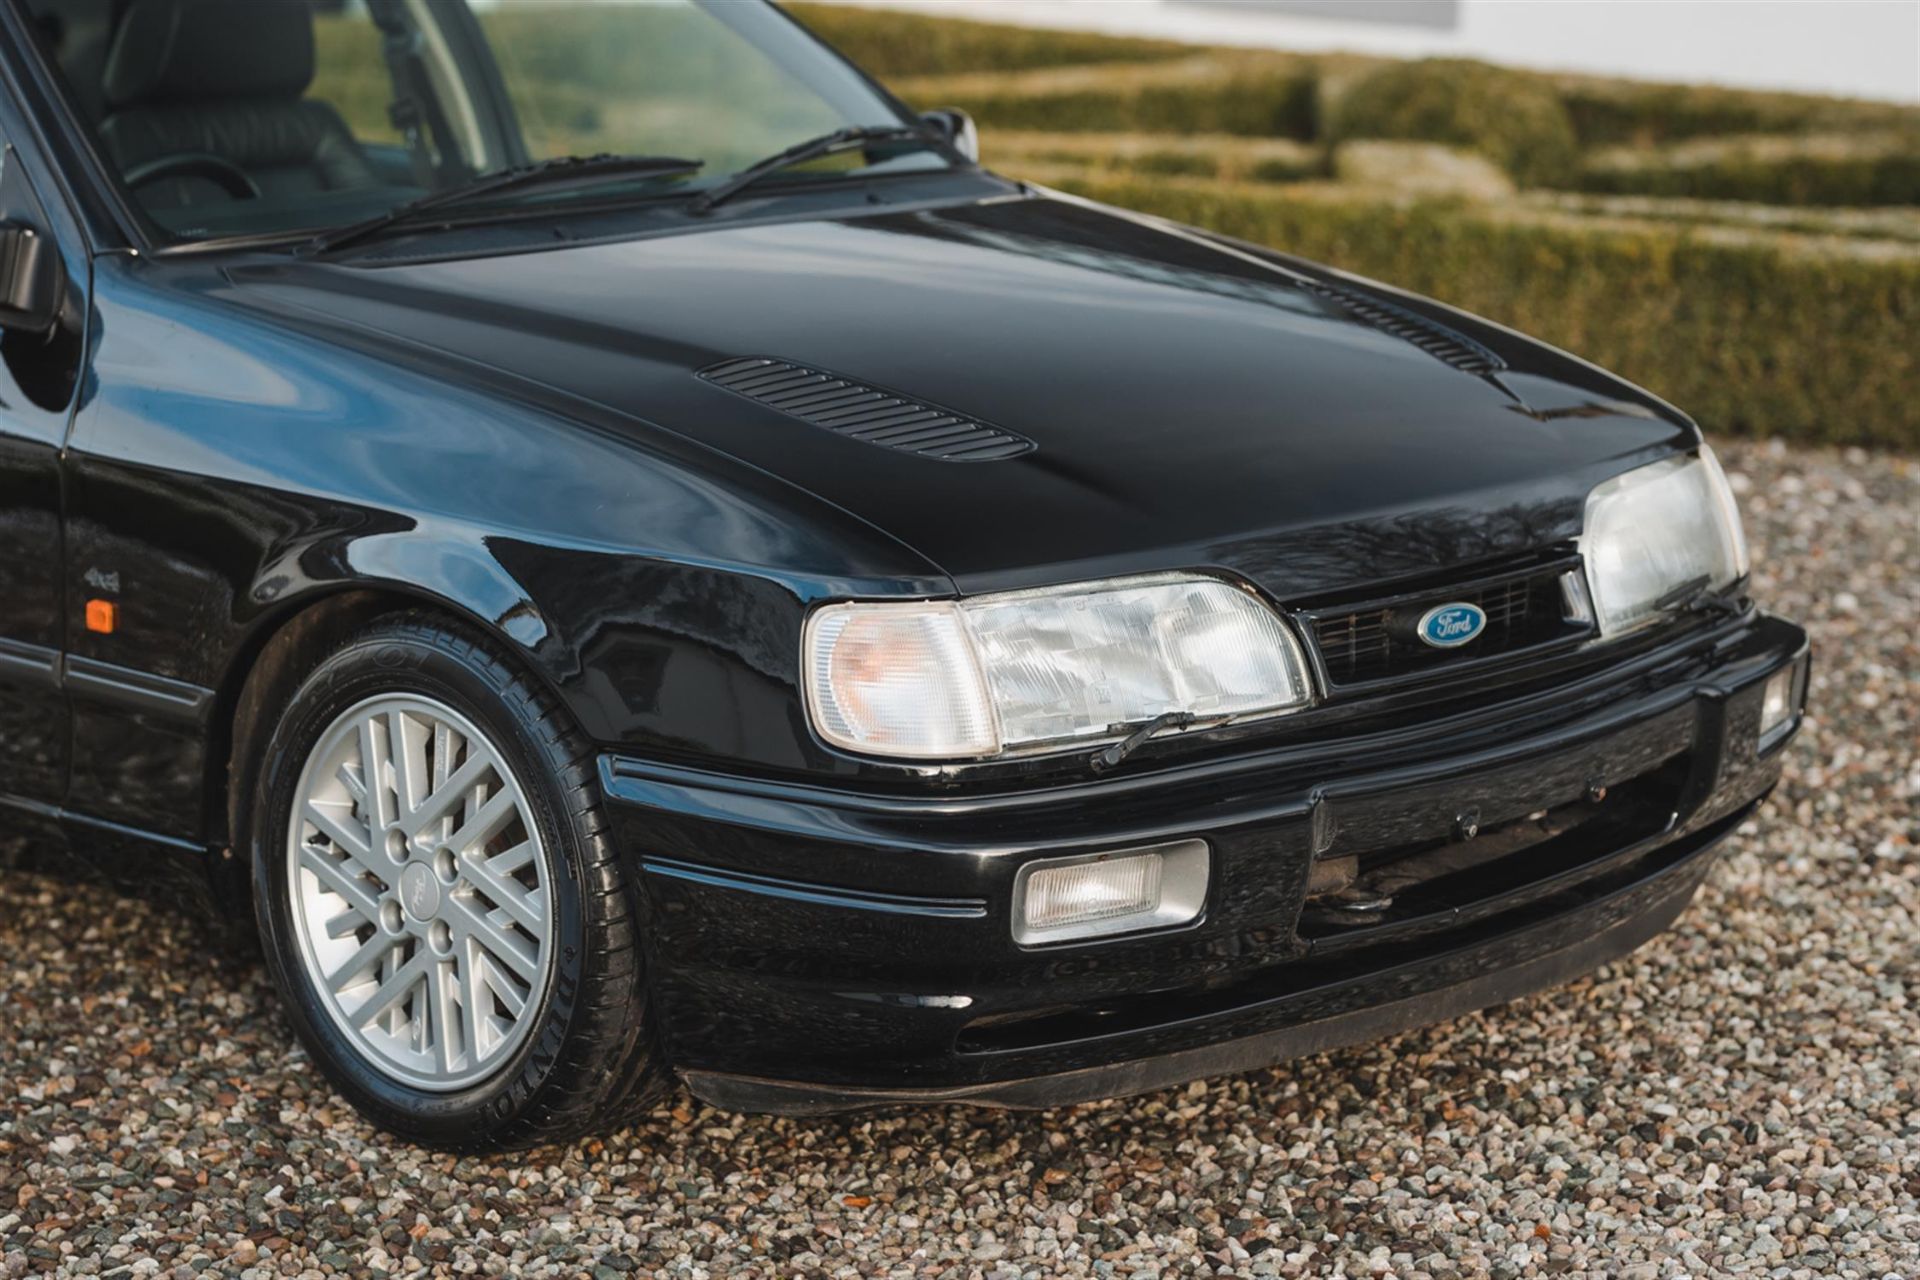 1990 Ford Sierra Sapphire RS Cosworth 4x4 - Image 8 of 10